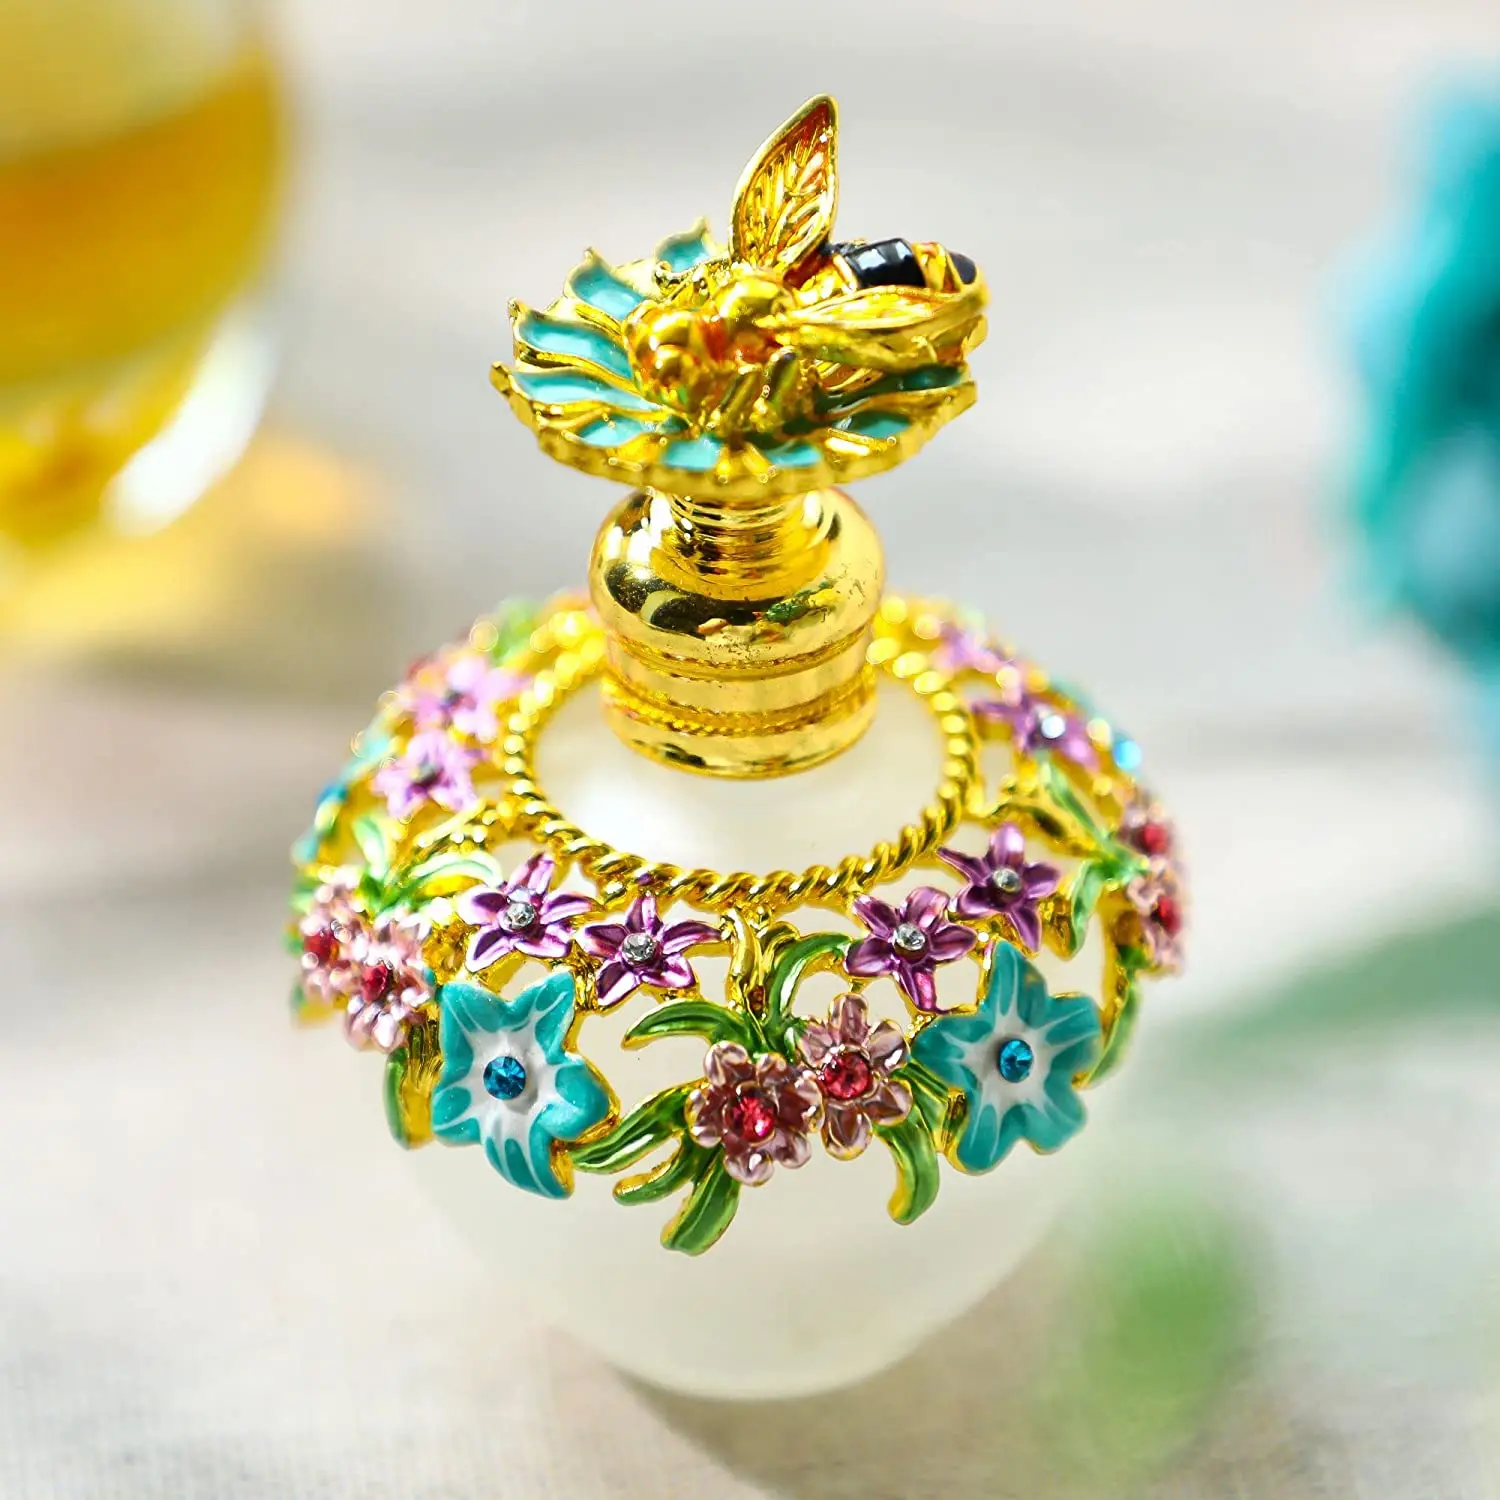 H&D Fancy Glass Perfume Bottle Empty with Flowers Bee Charm Decorative Vintage Crystal Perfume Decanter(Golden,40ML)